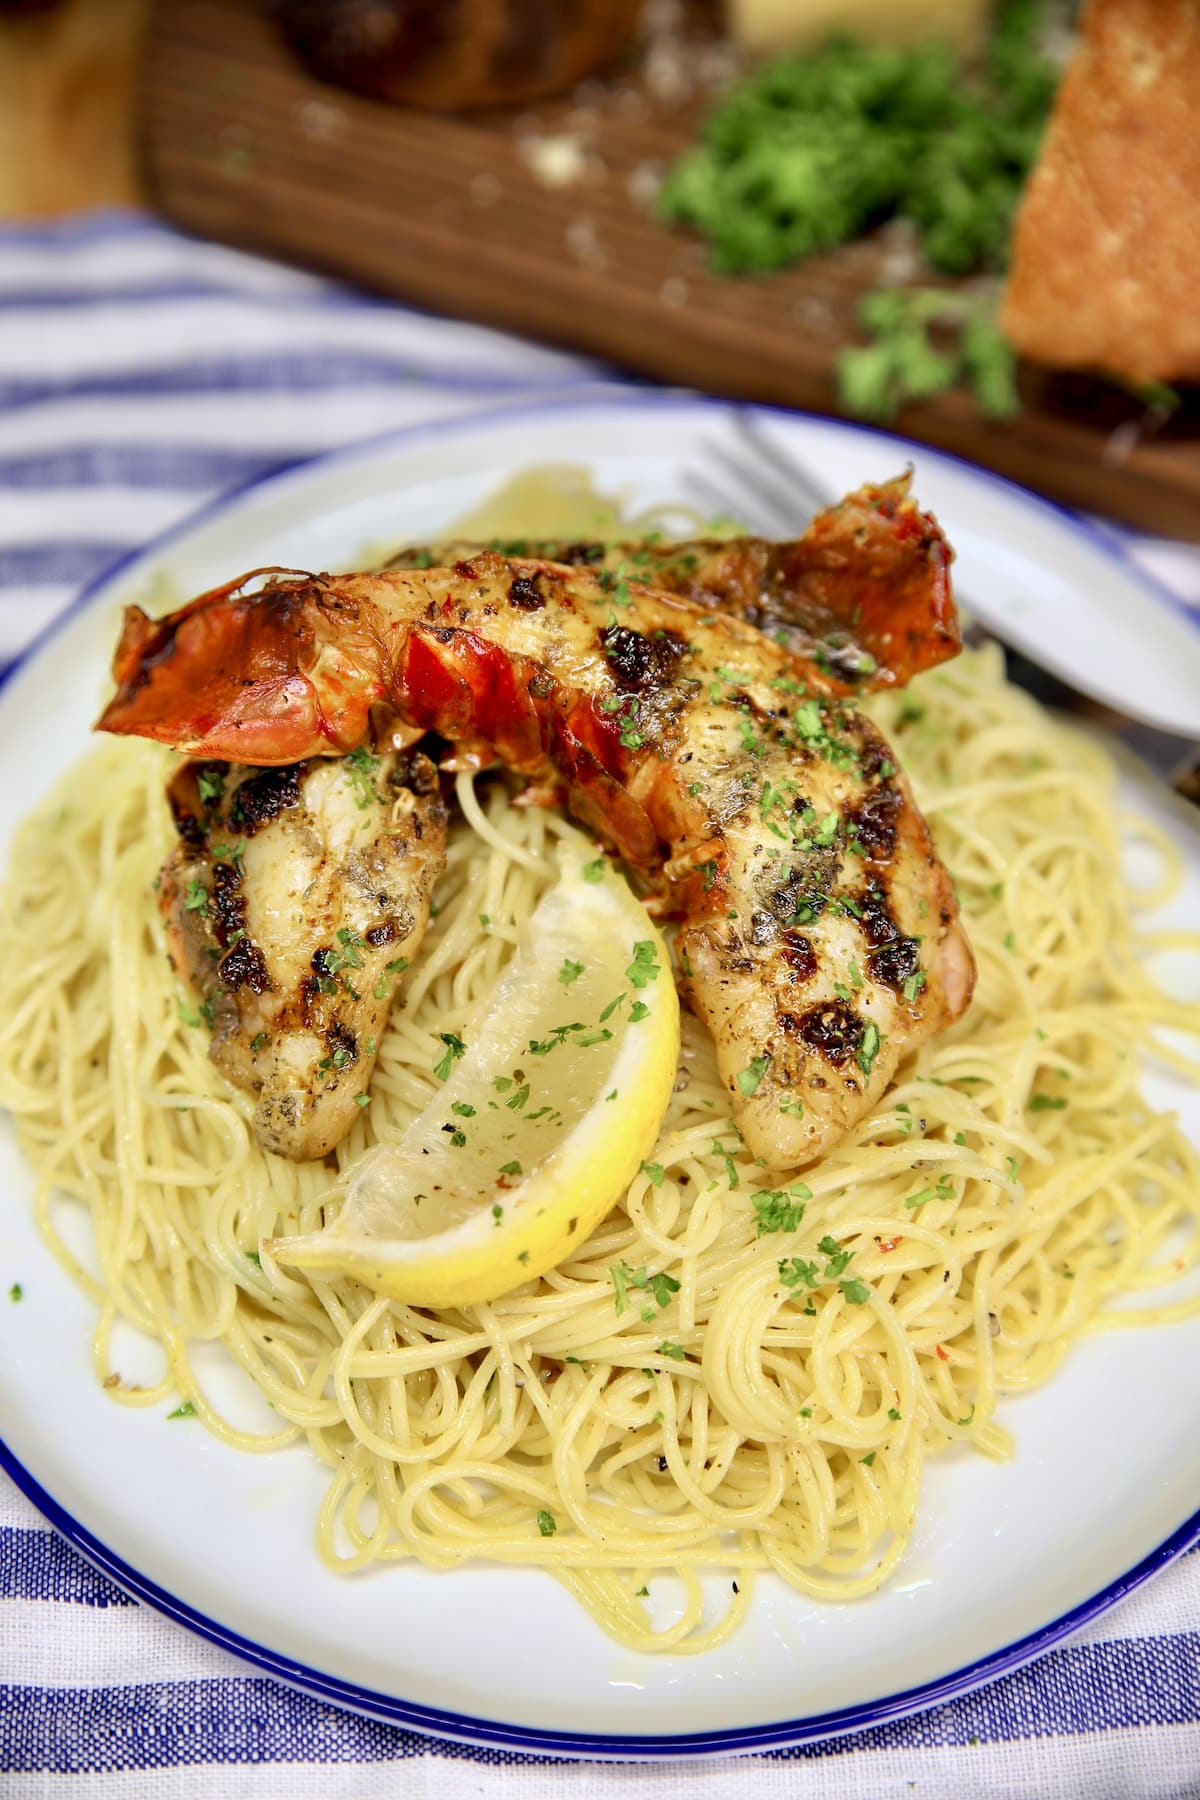 Lobster tails with lemon pasta on a plate.